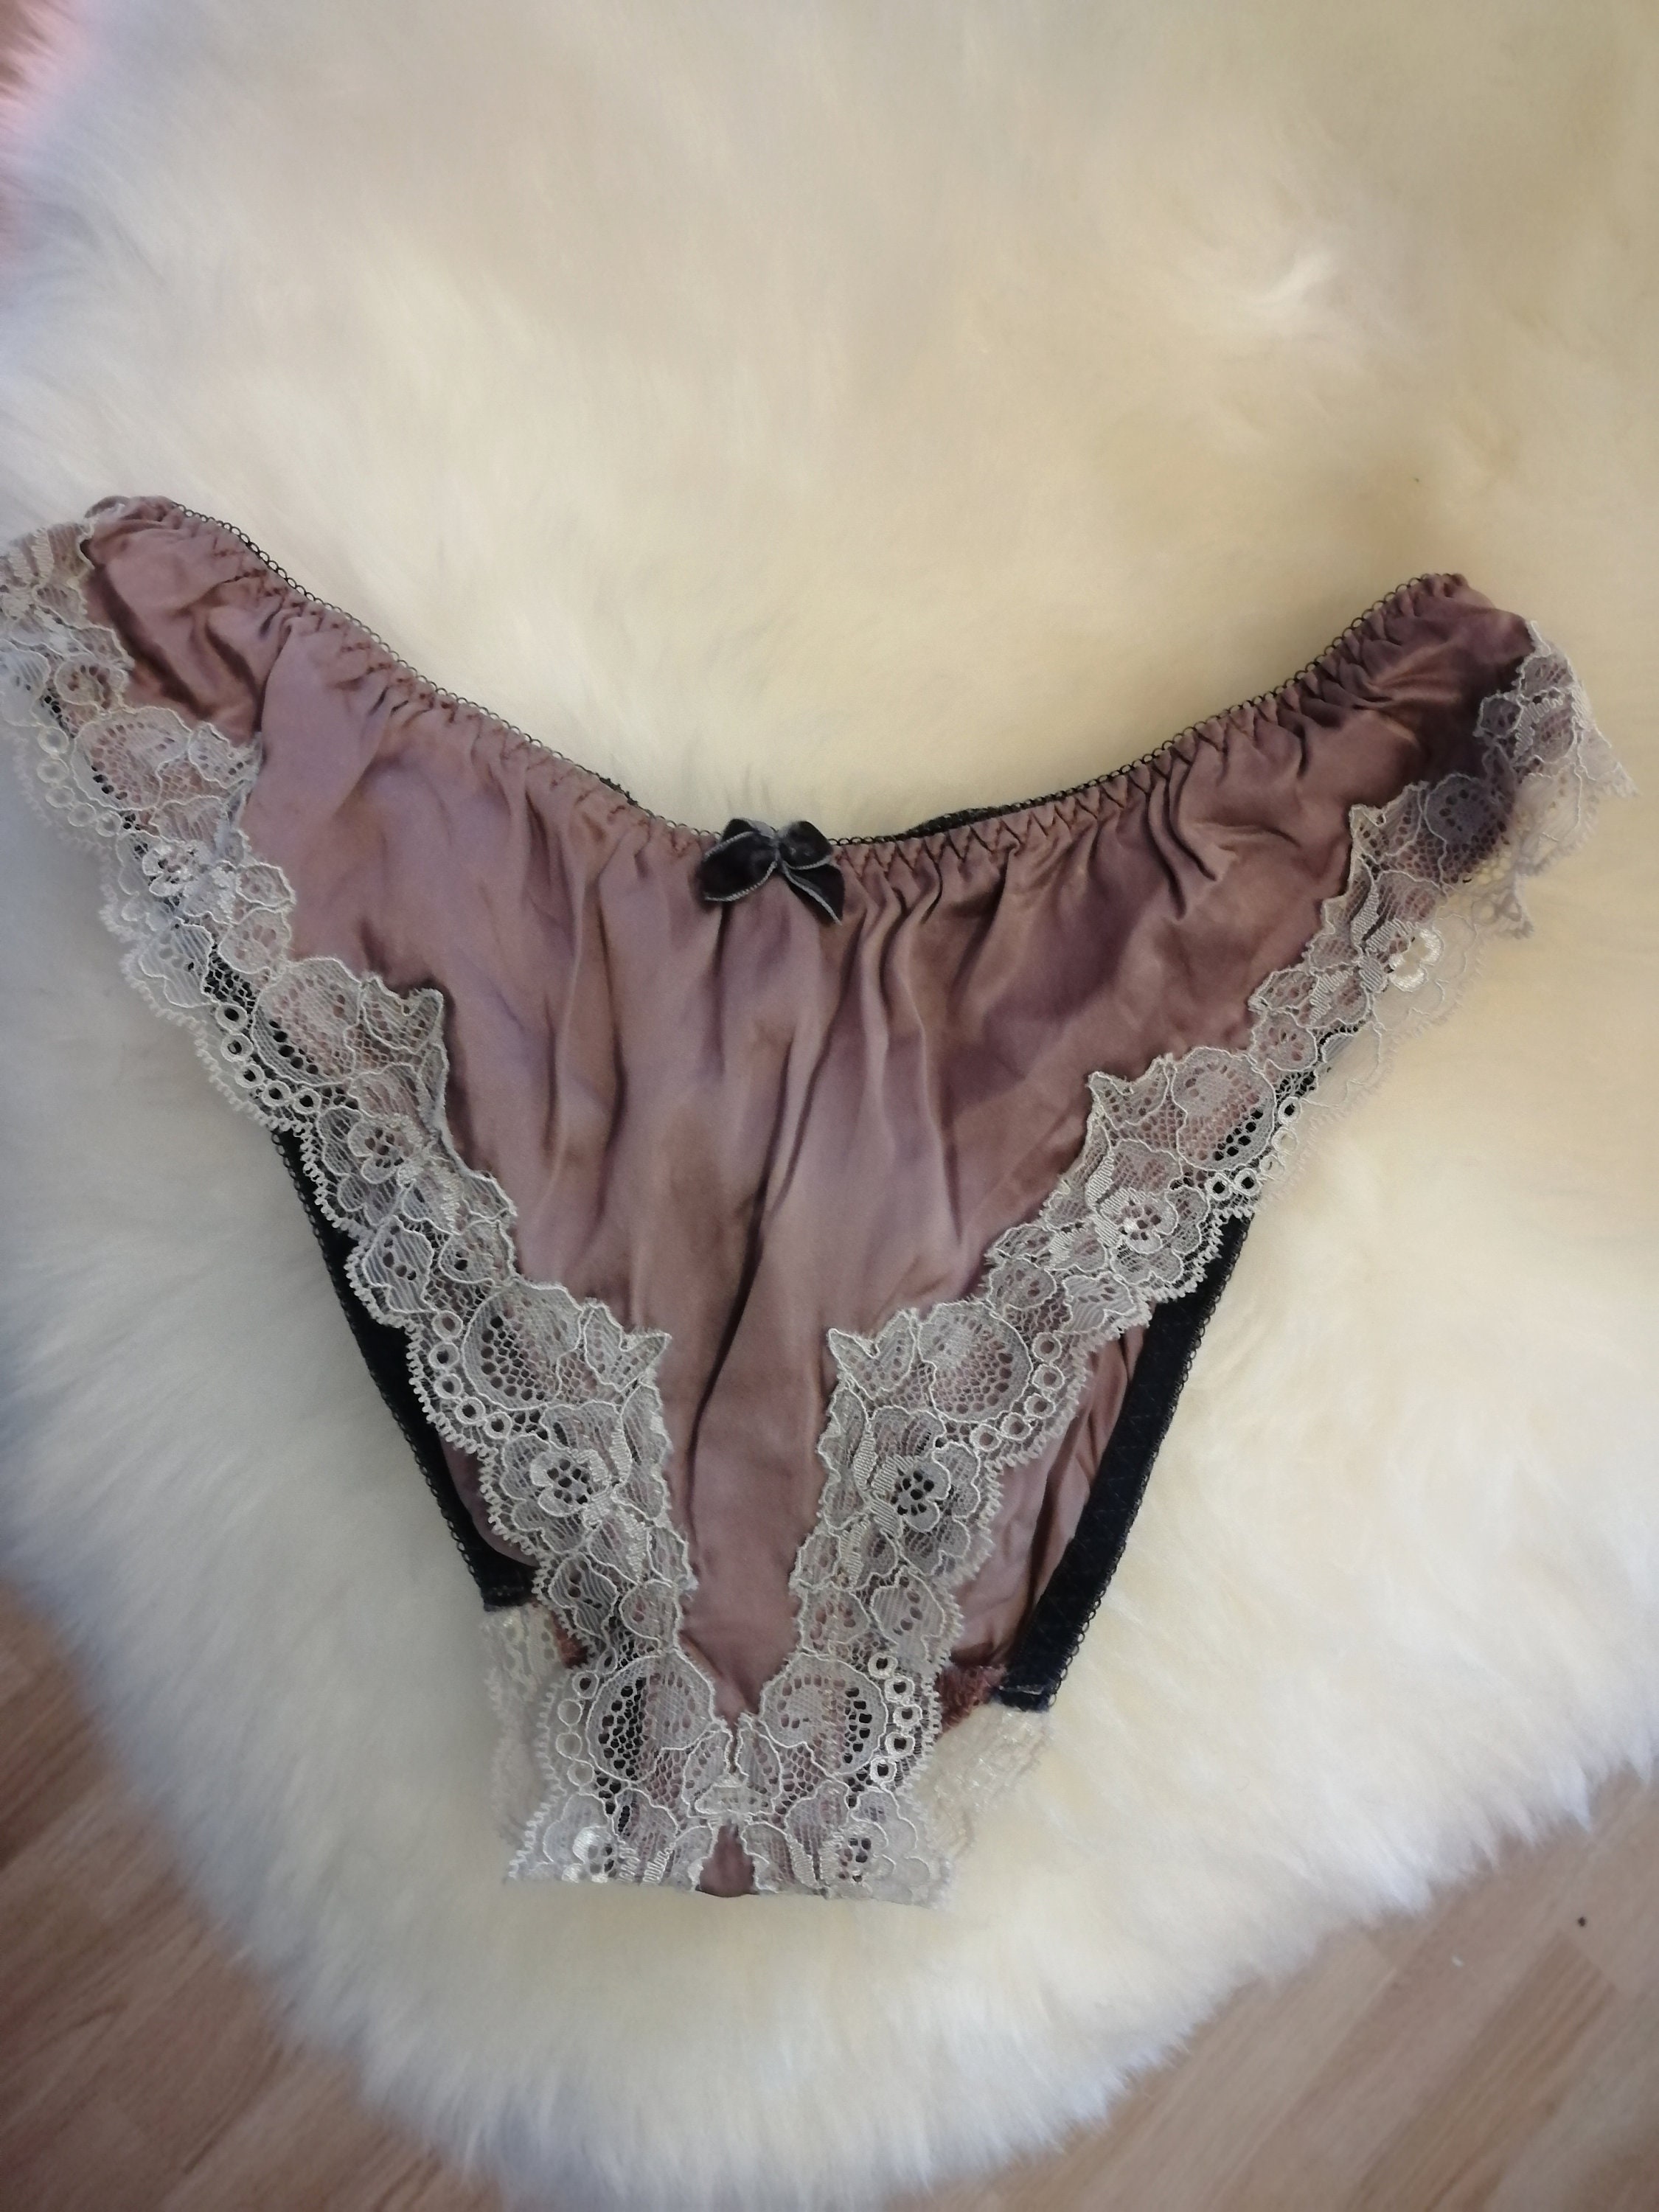 Vintage 1980s French Silk, Lace, High Leg, Tanga Light Violet Panties,  Knickers Size UK 8 in Mint Condition -  New Zealand